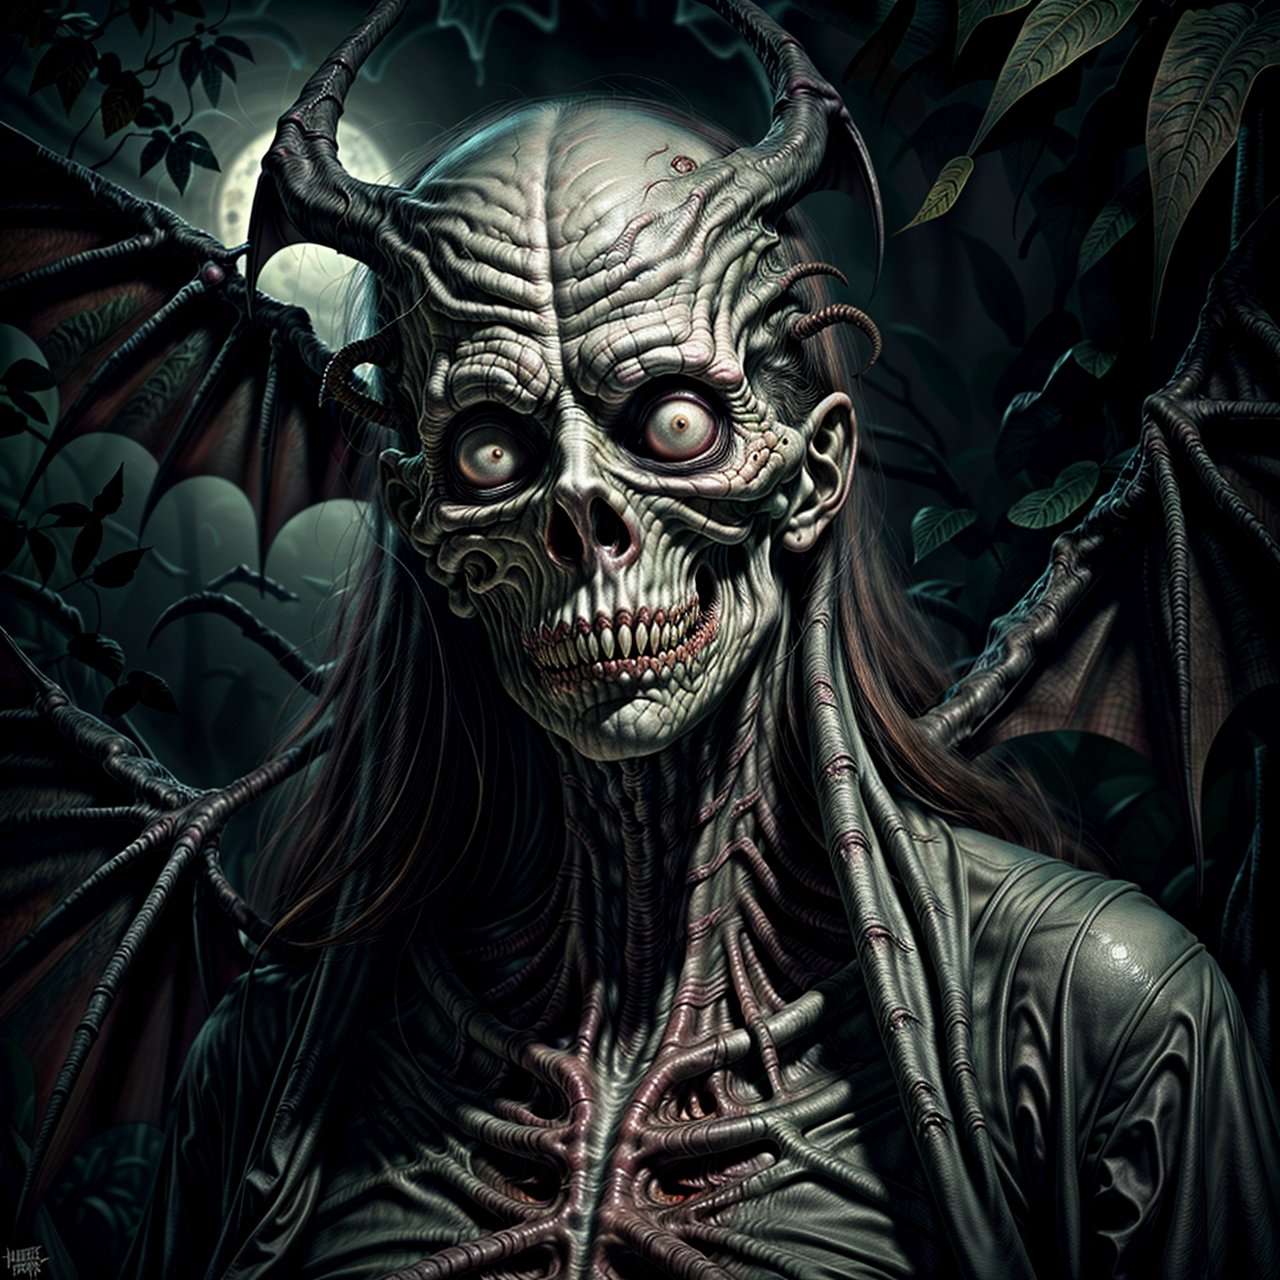 Skinny scary looking demon, riding a bat, gloomy jungle background, full color, detailed facial features, very detailed,  hyper realistic, intricate detail, illustration style, high solution,detailed, hyper realistic, intricate detail, illustration style, high resolution,monster,more detail XL,horror, ,Masterpiece,Epicrealism,stalker,style,creepy,misery,zomb00d